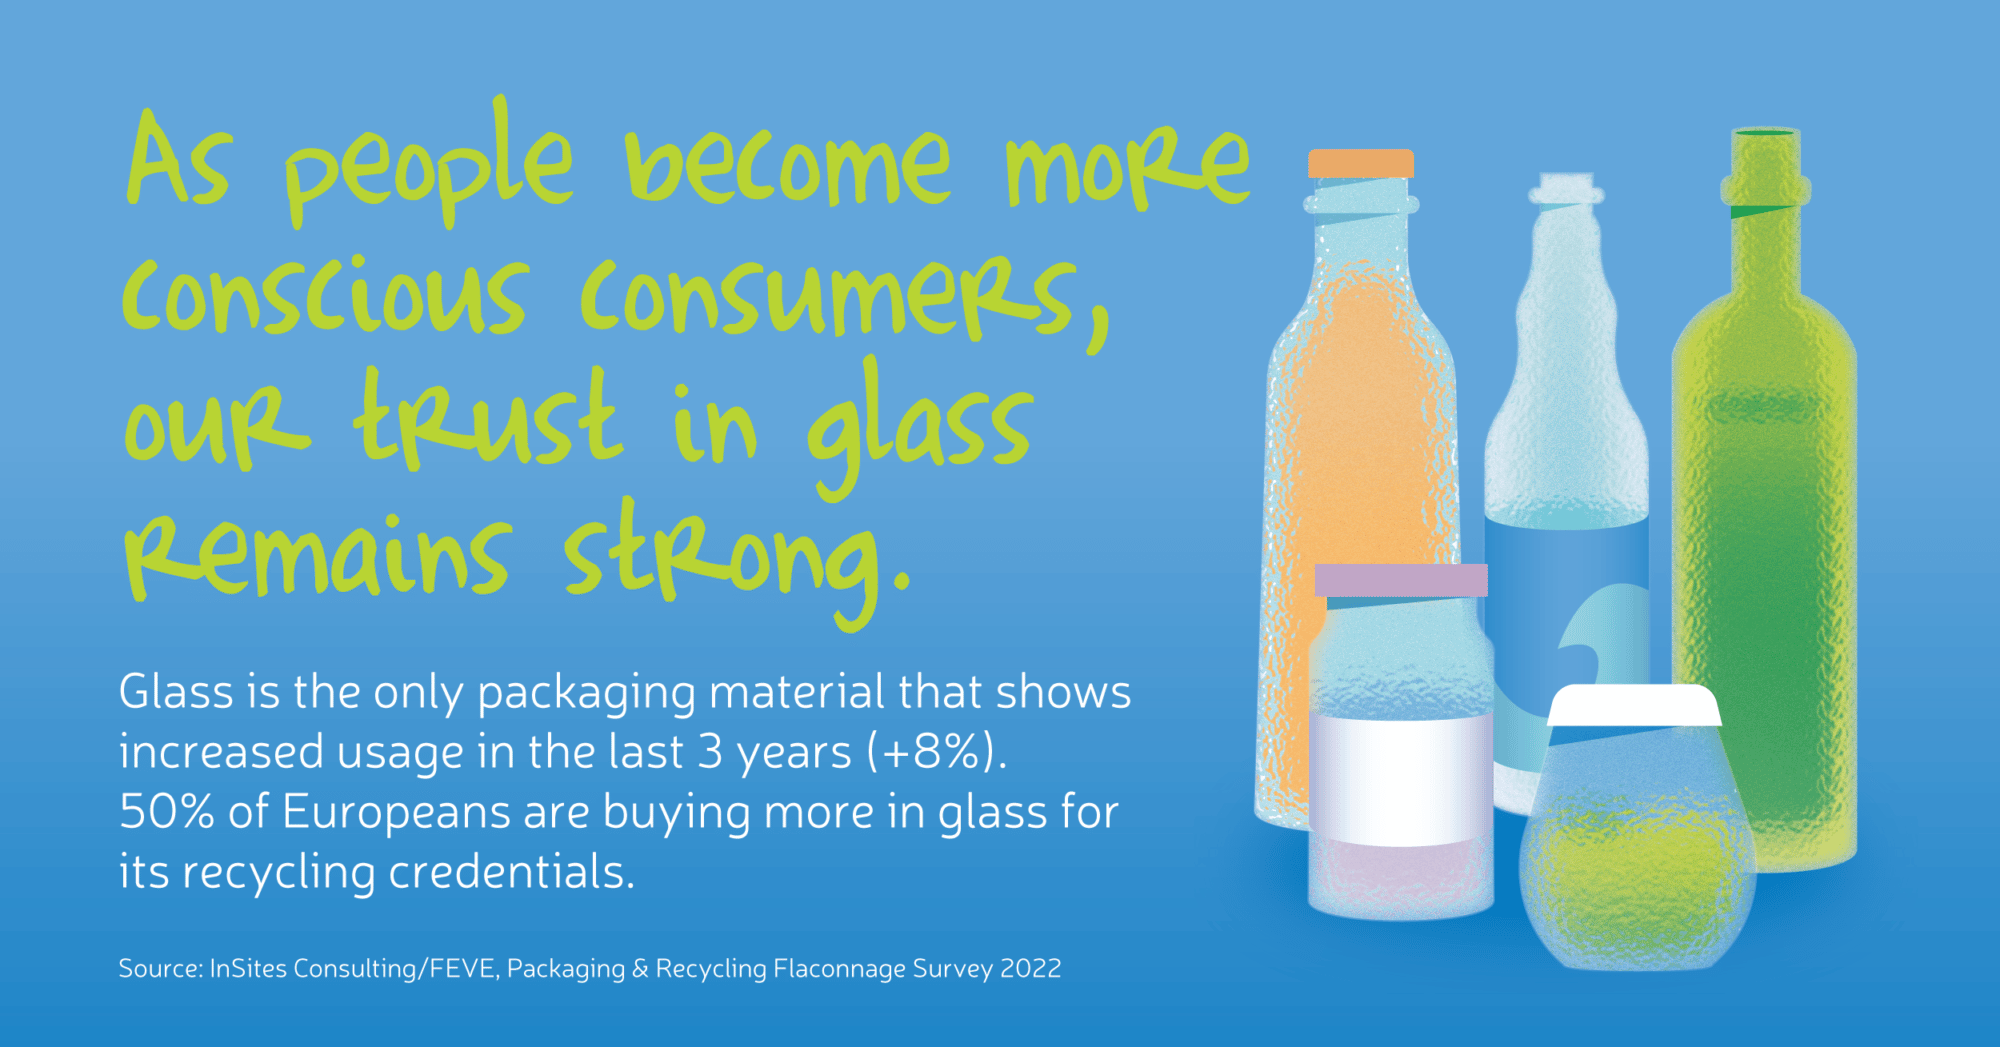 Text: as people become more conscious consumers, our trust in glass remains strong. On the right glass bottles in various sizes